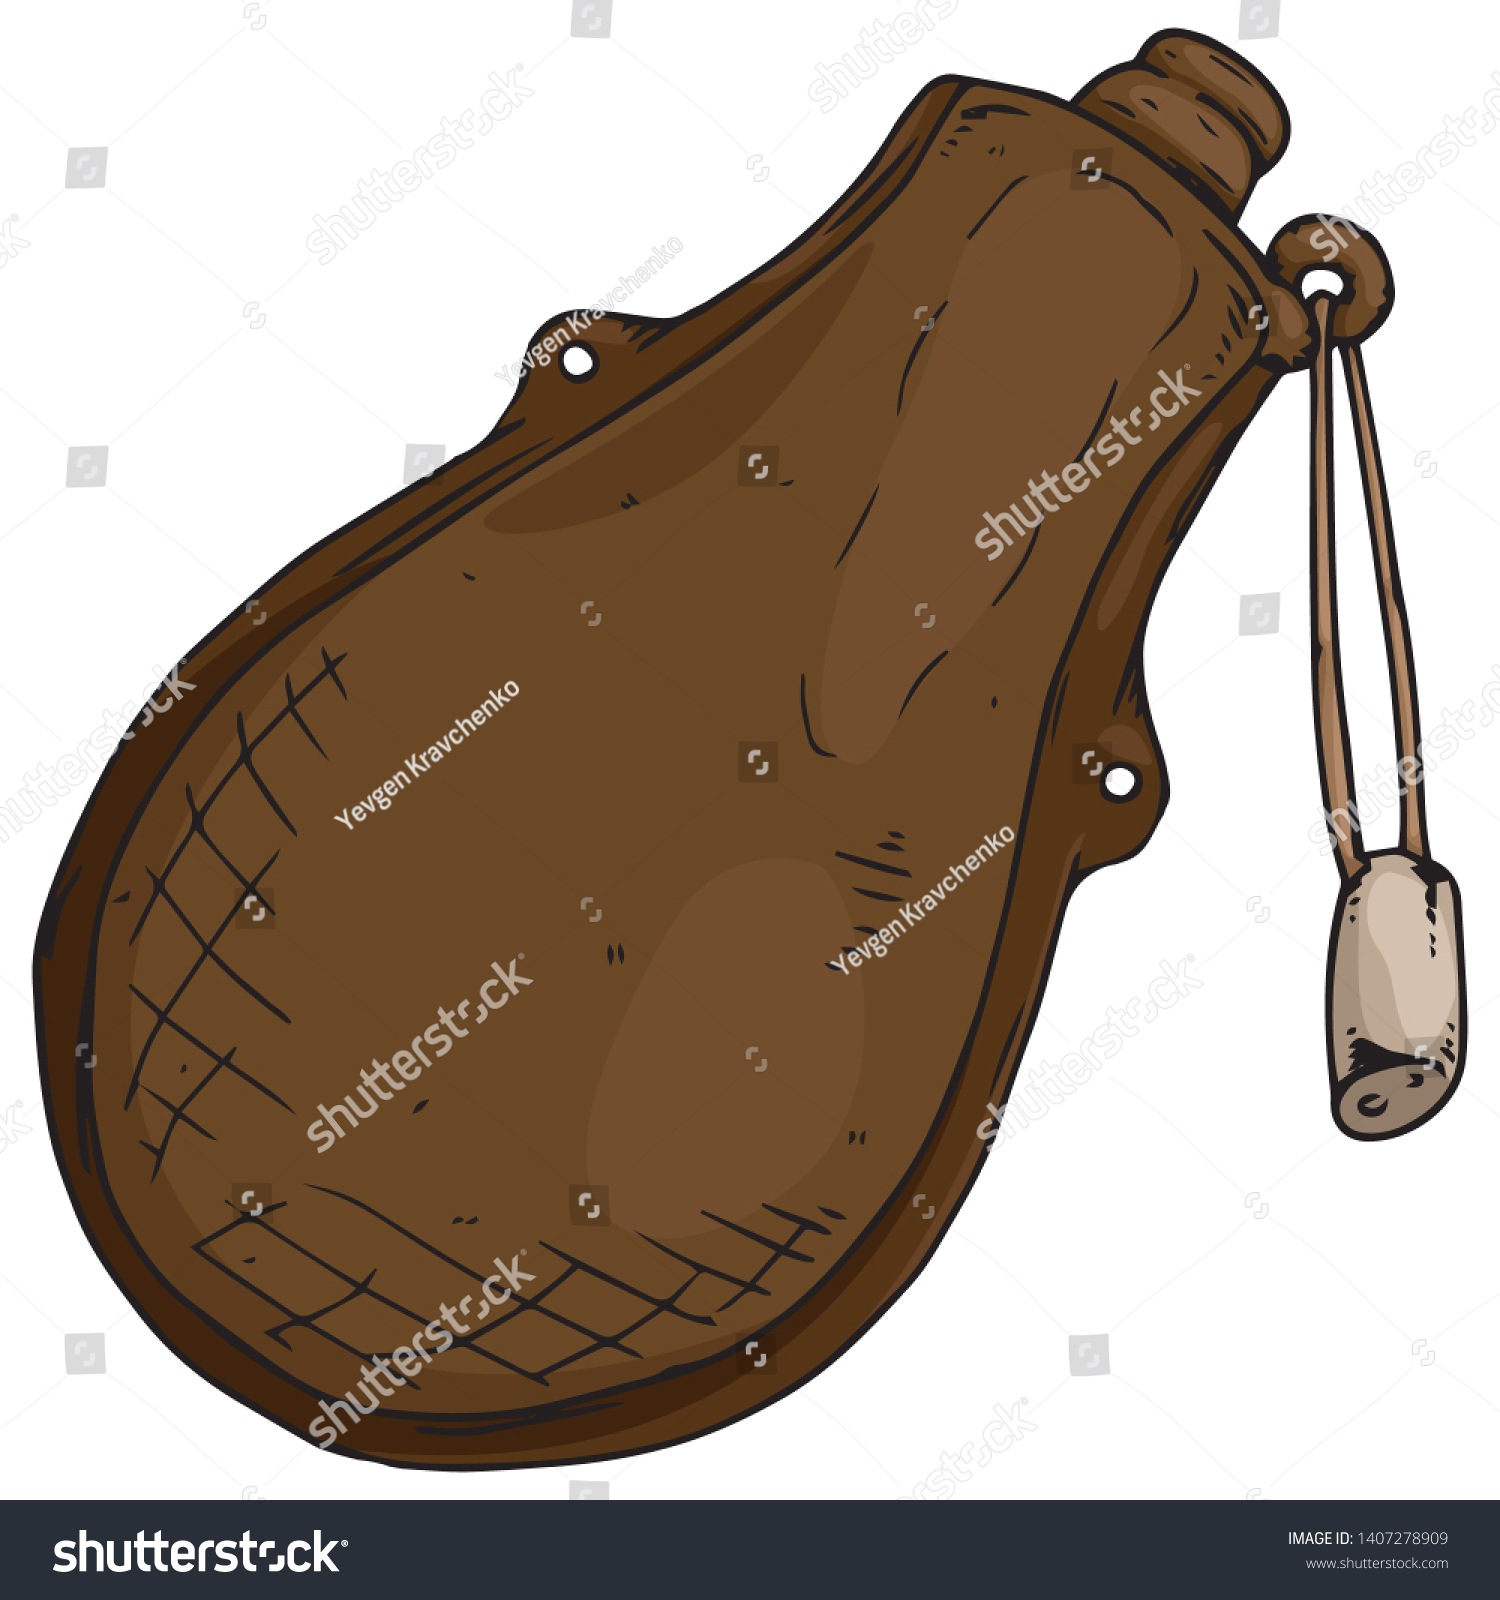 Download Leather Flask Icon Vector Illustration Old Stock Vector Royalty Free 1407278909 PSD Mockup Templates